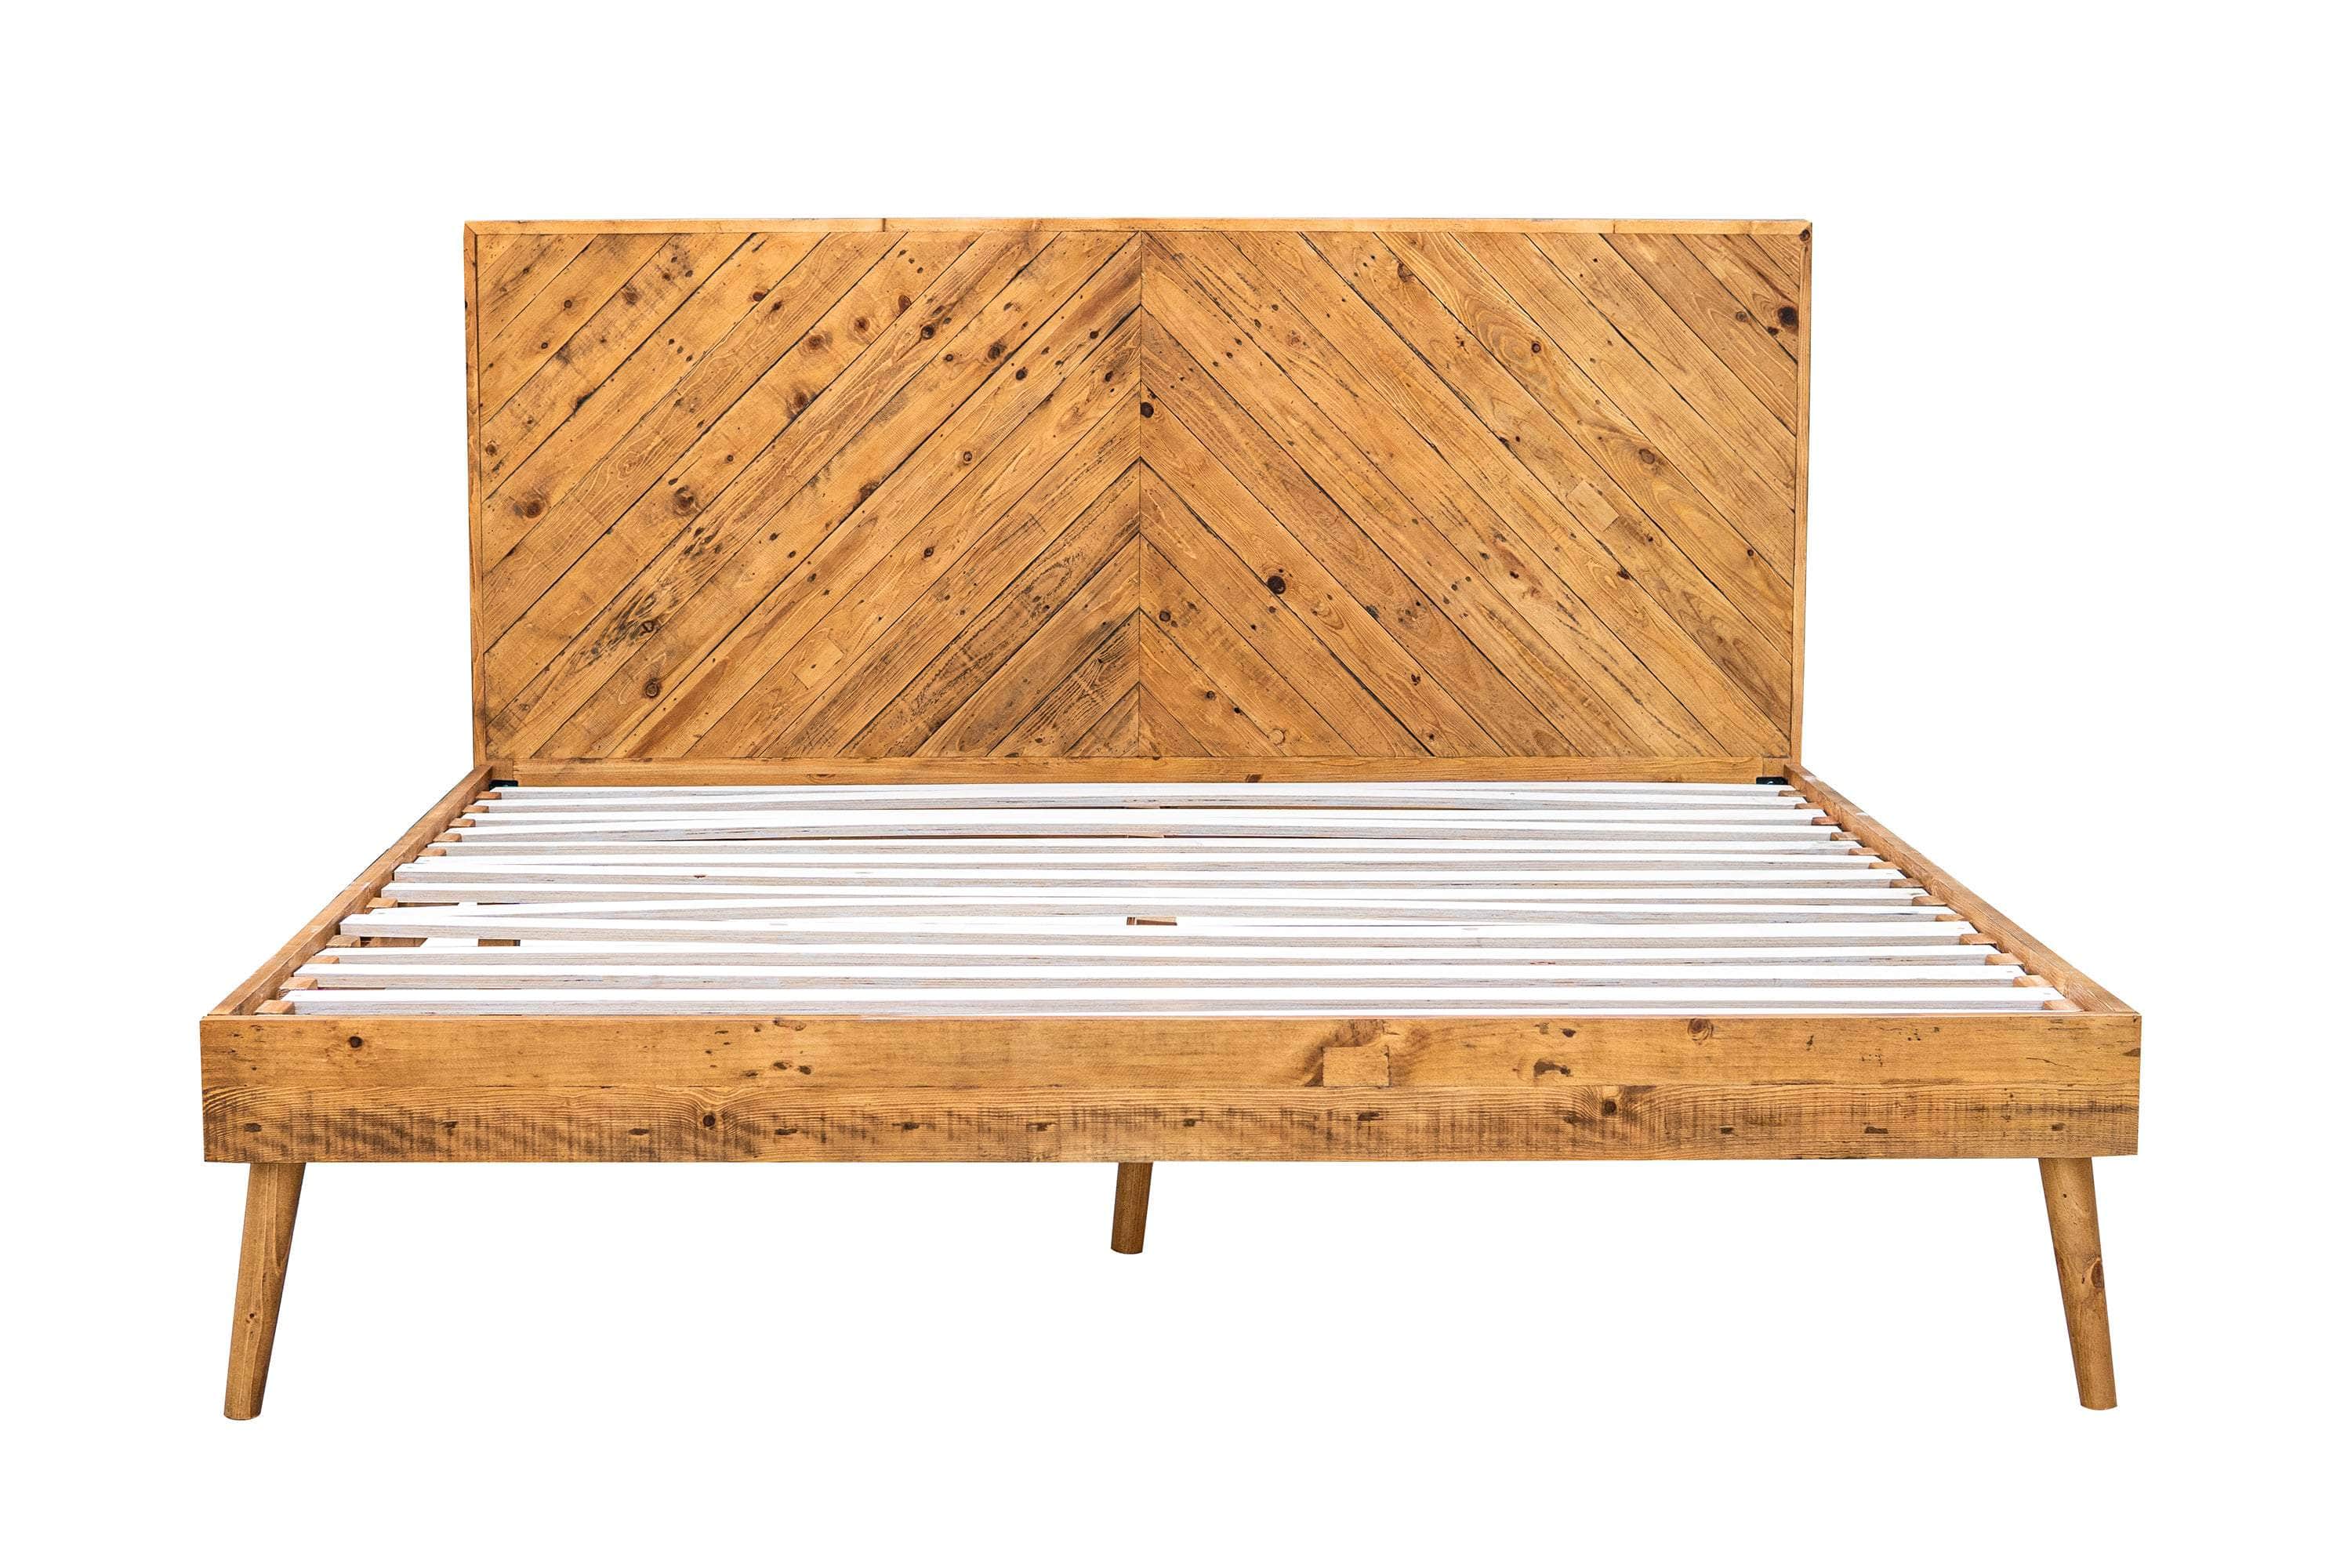 Rustic Classics Bed King Cypress Reclaimed Wood Platform Bed in Spice - Available in 2 Sizes